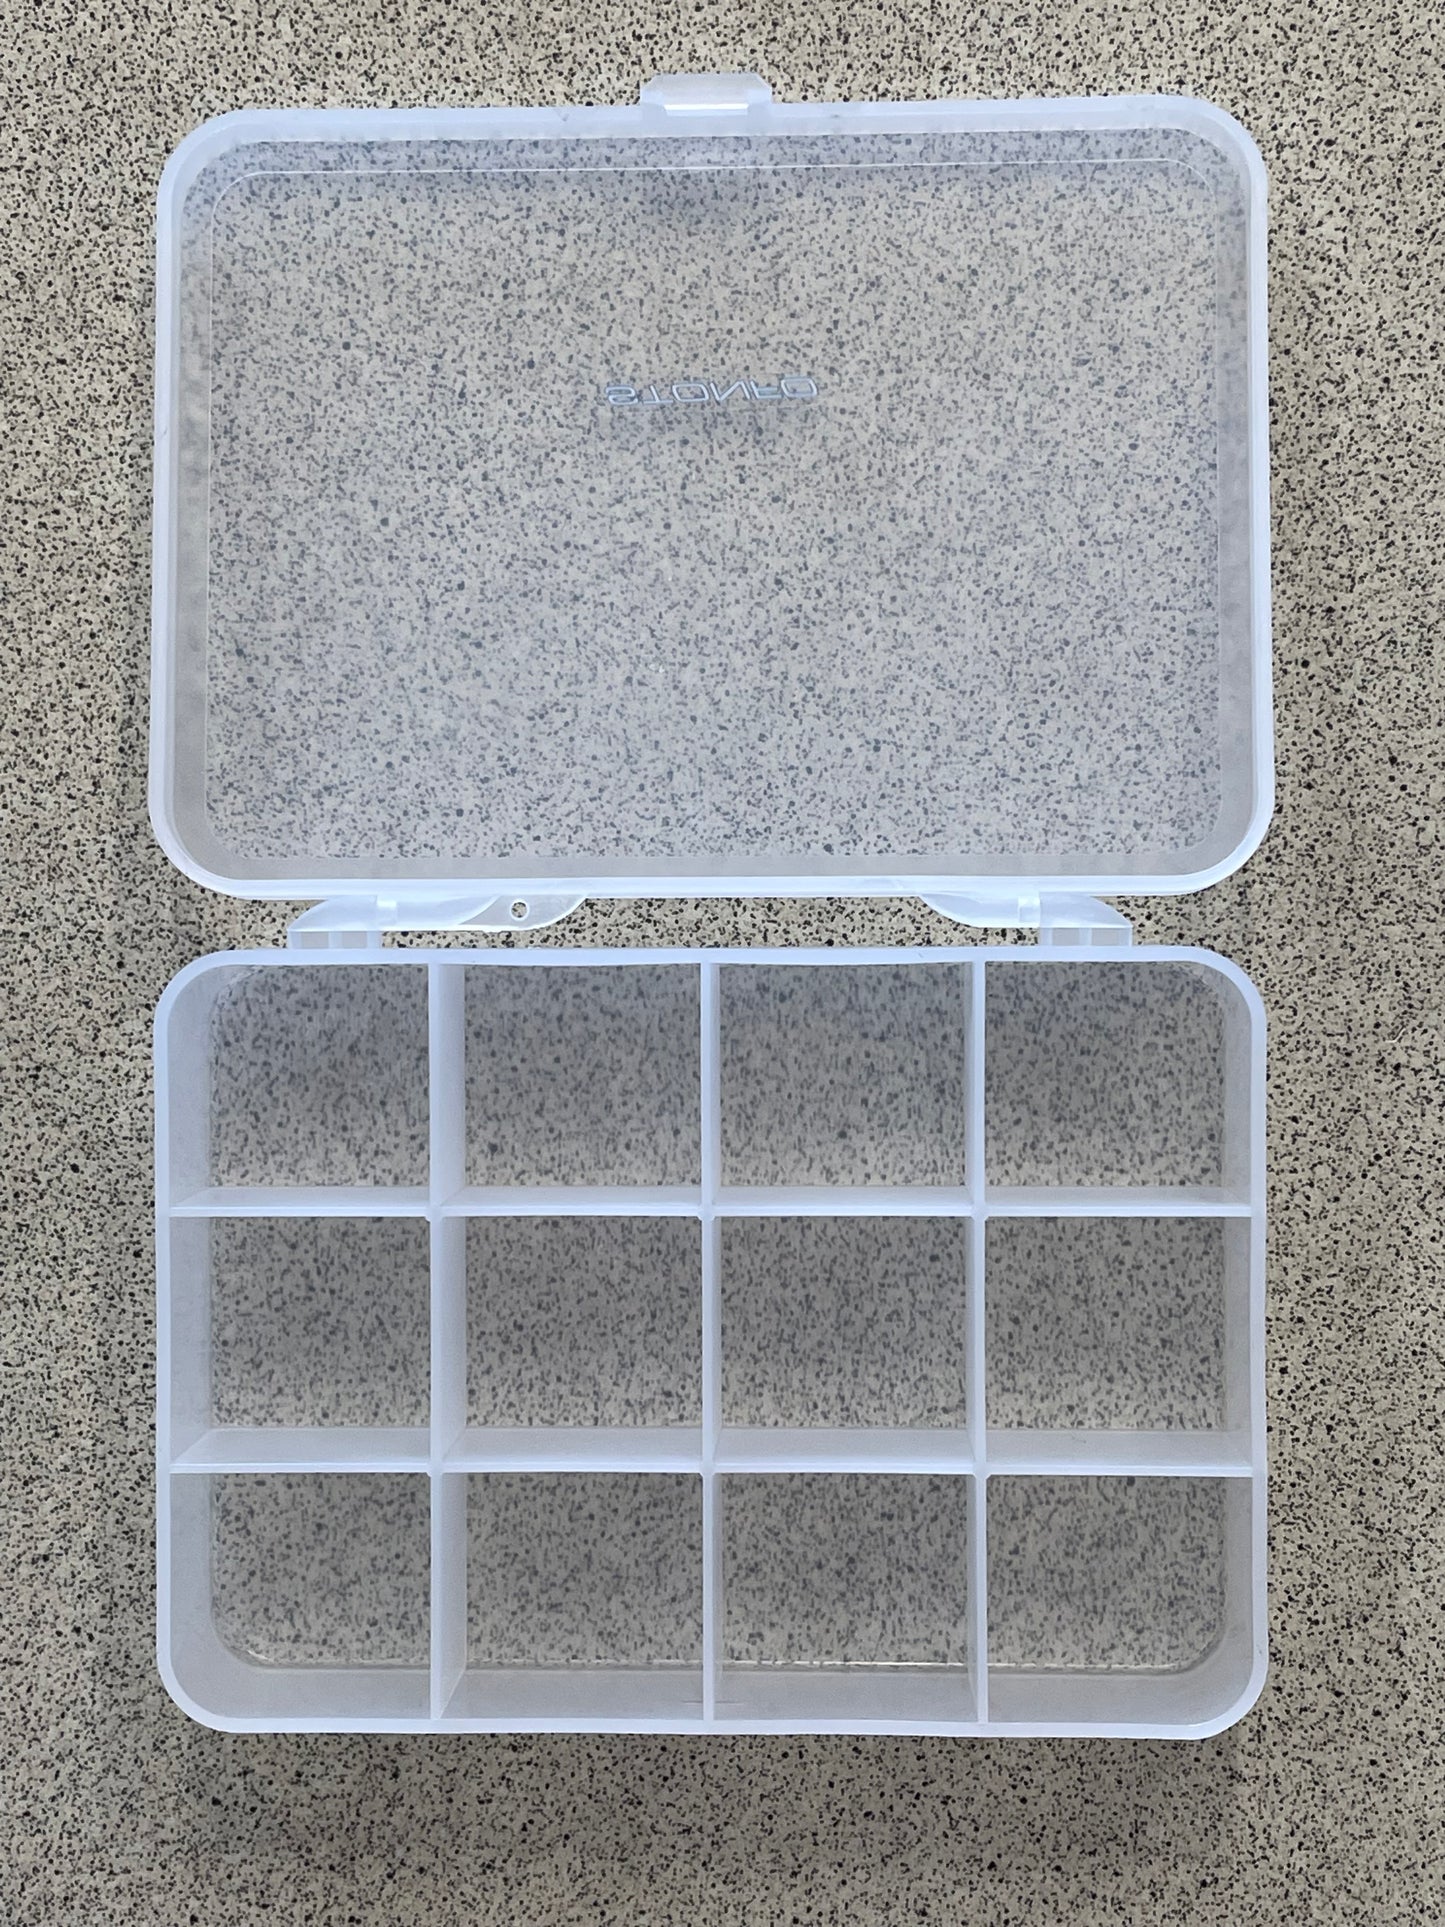 Stonfo F Type Small Fly Box -12 Compartment